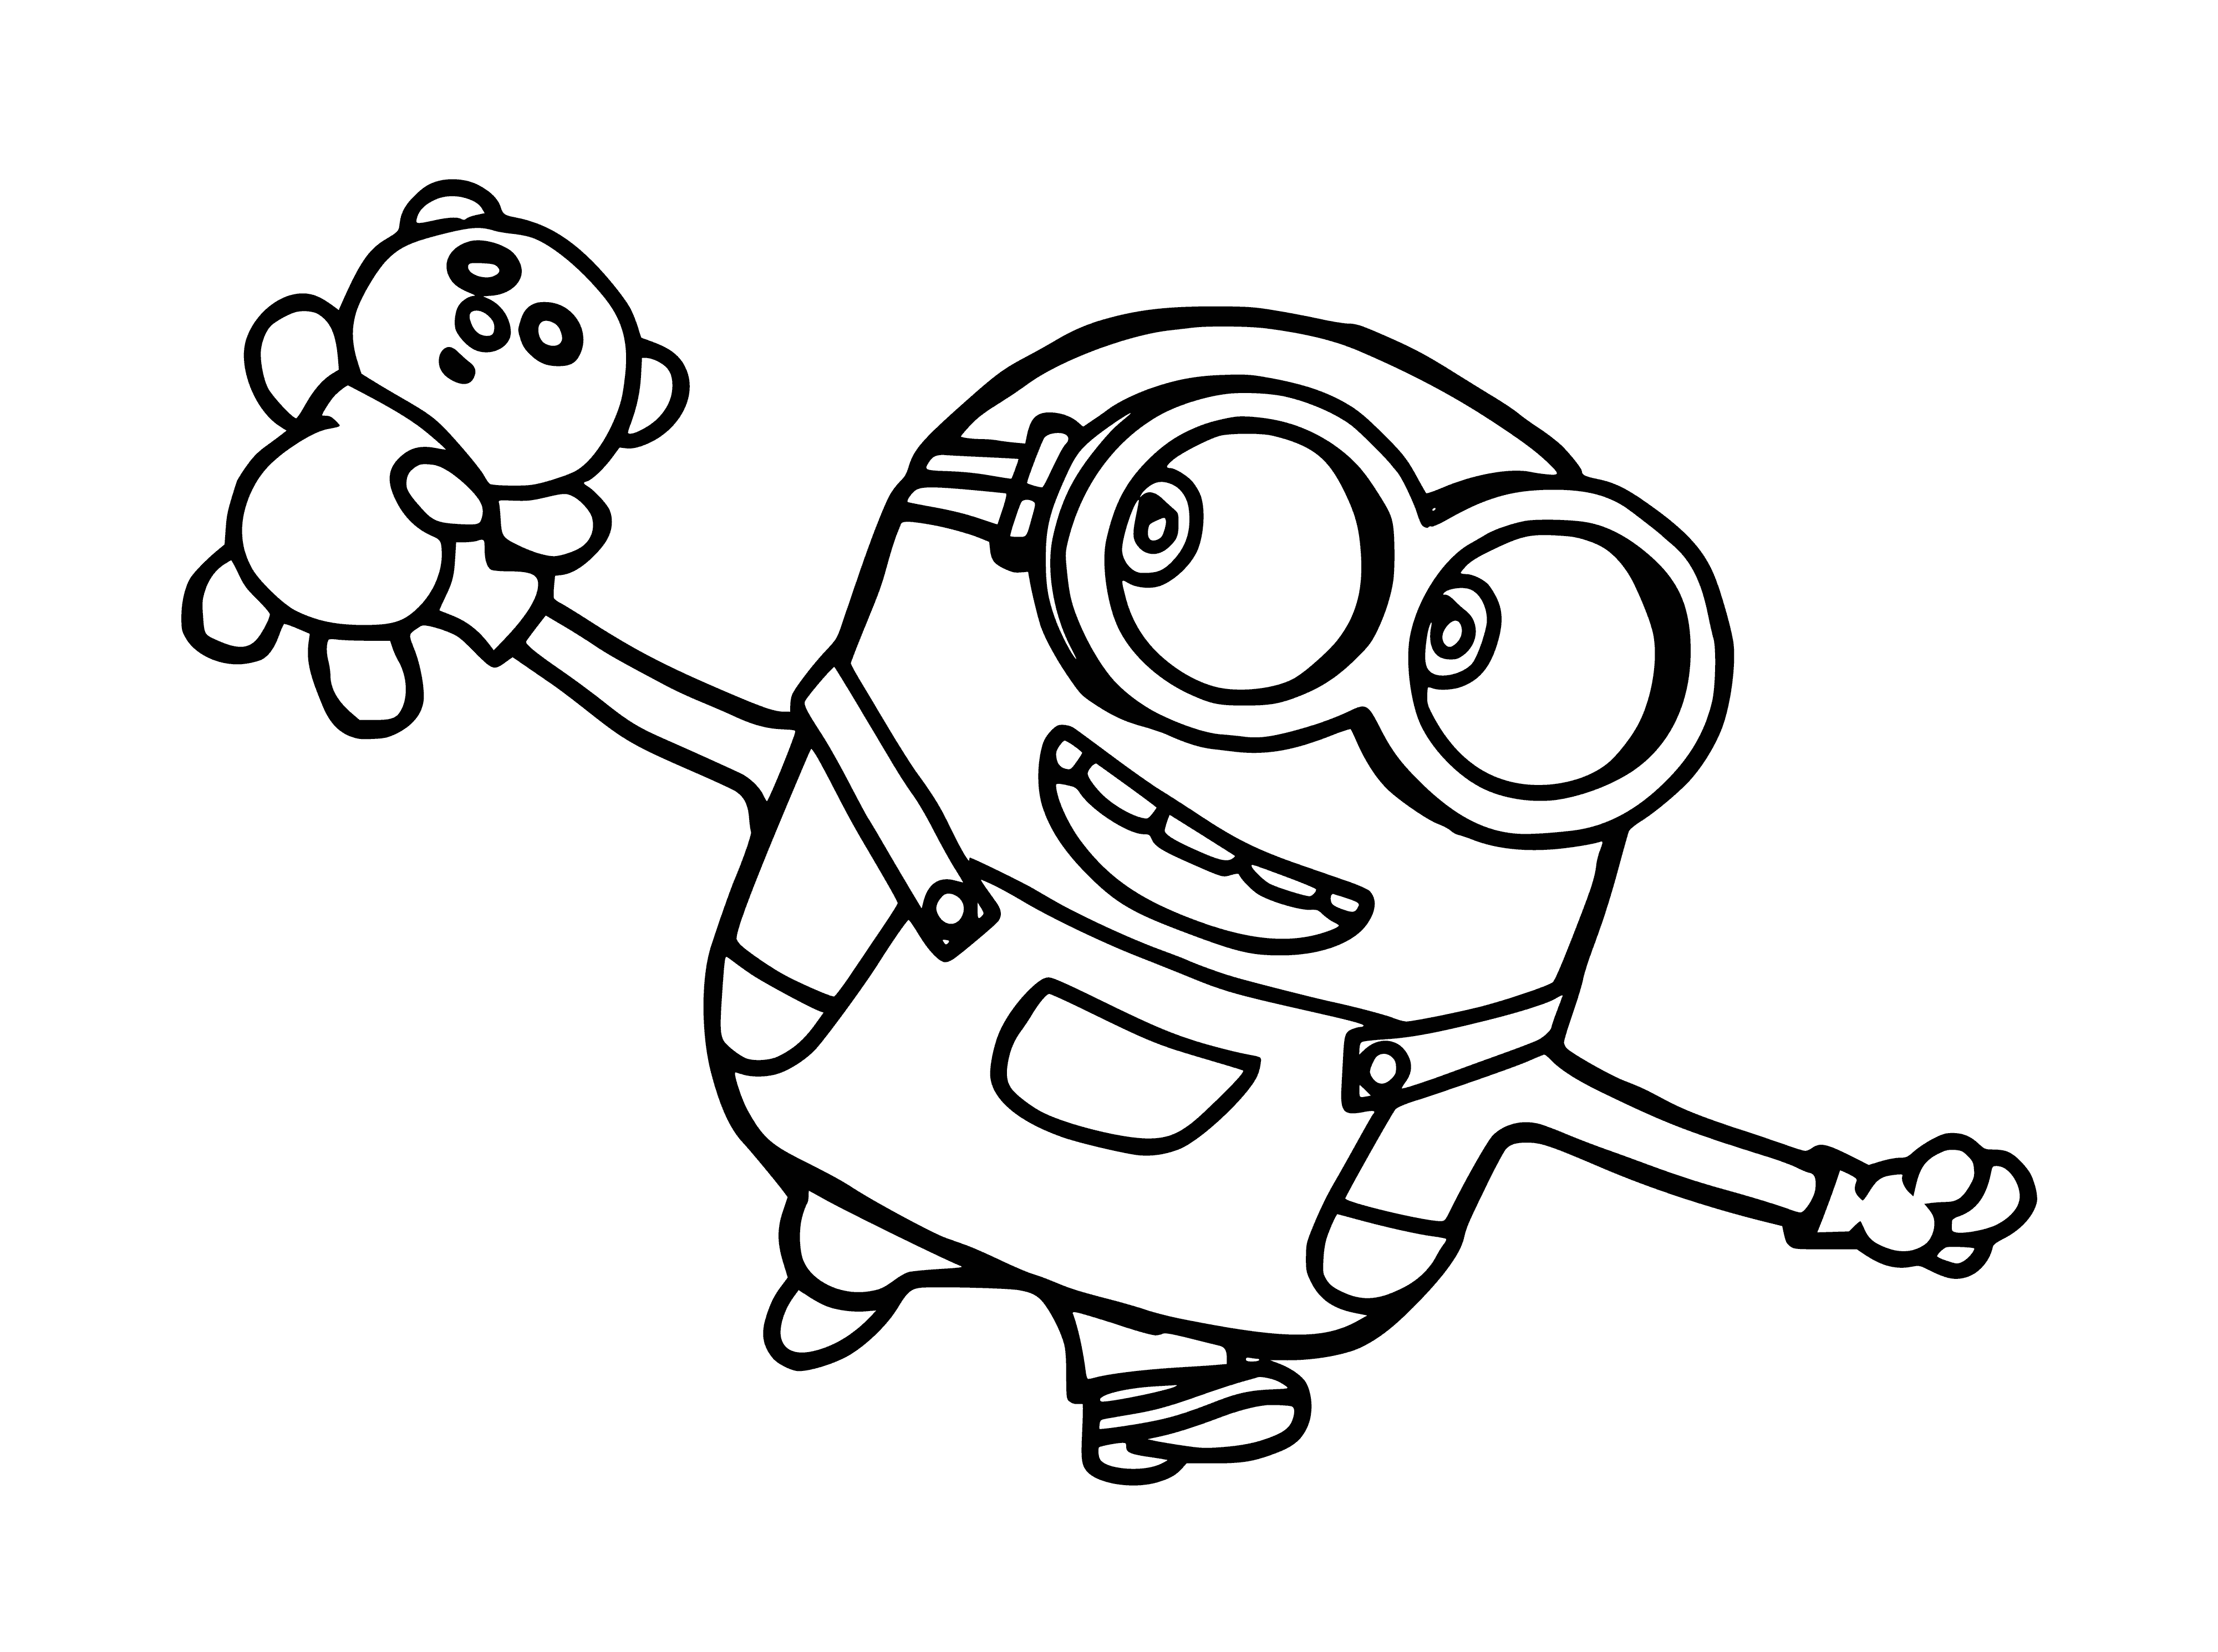 Minion Bob with a teddy bear coloring page